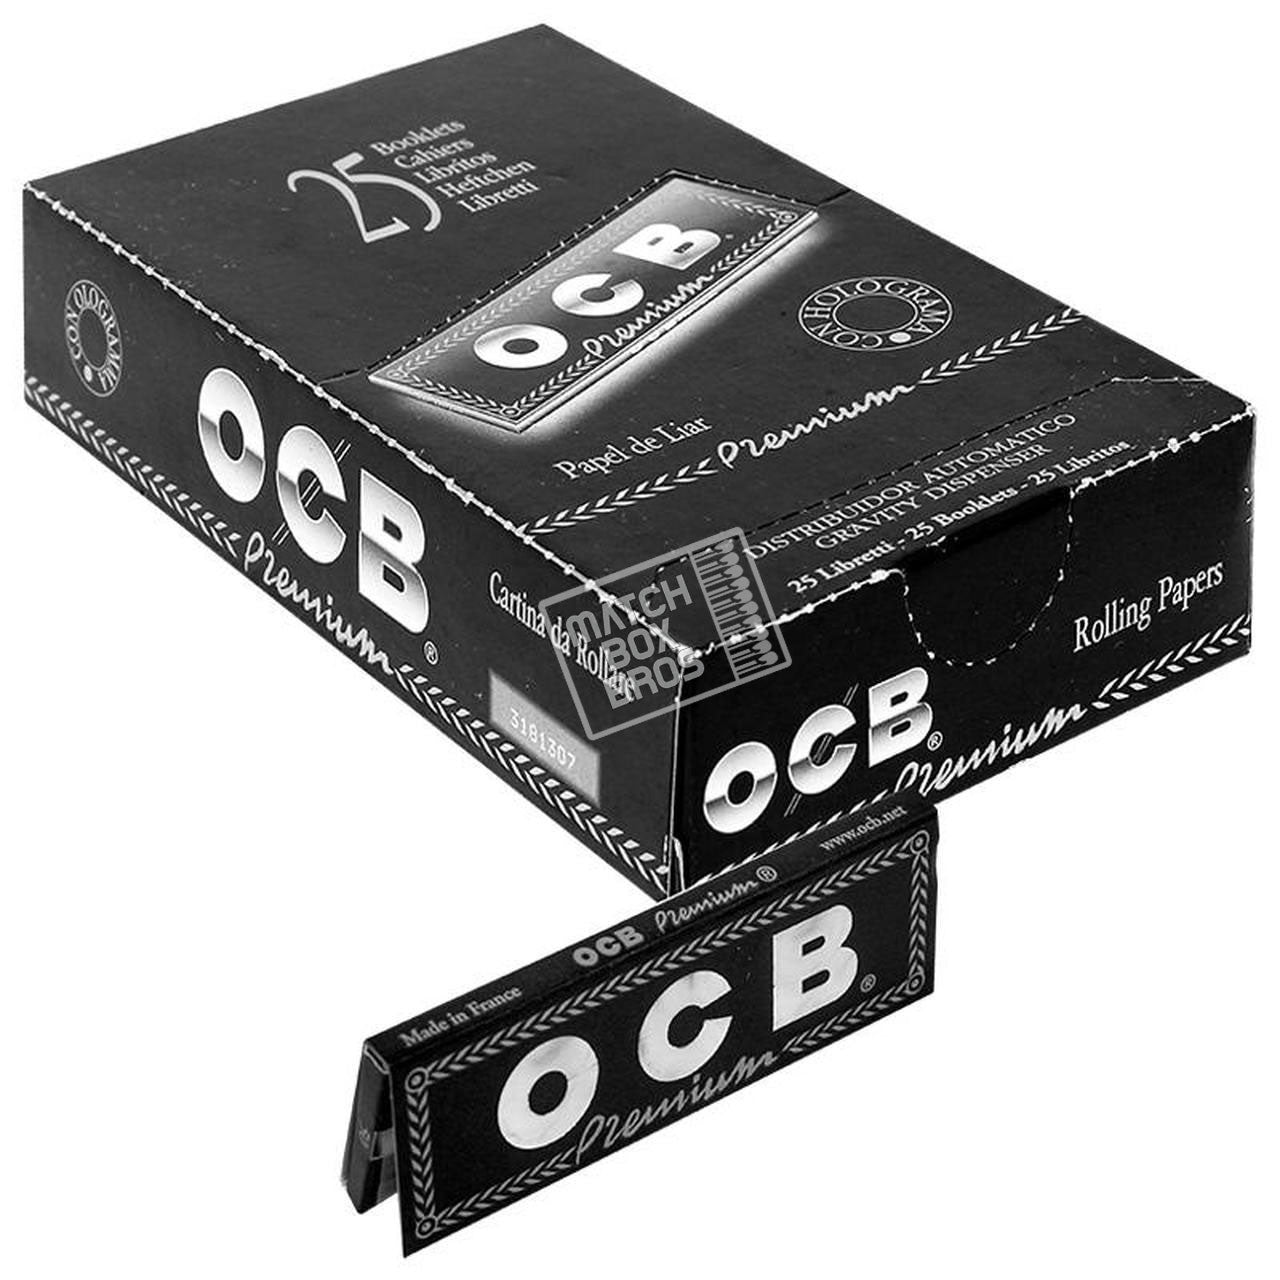  1 box - OCB Single Premium No1 rolling paper regular size 70mm  - 2500 papers : Health & Household